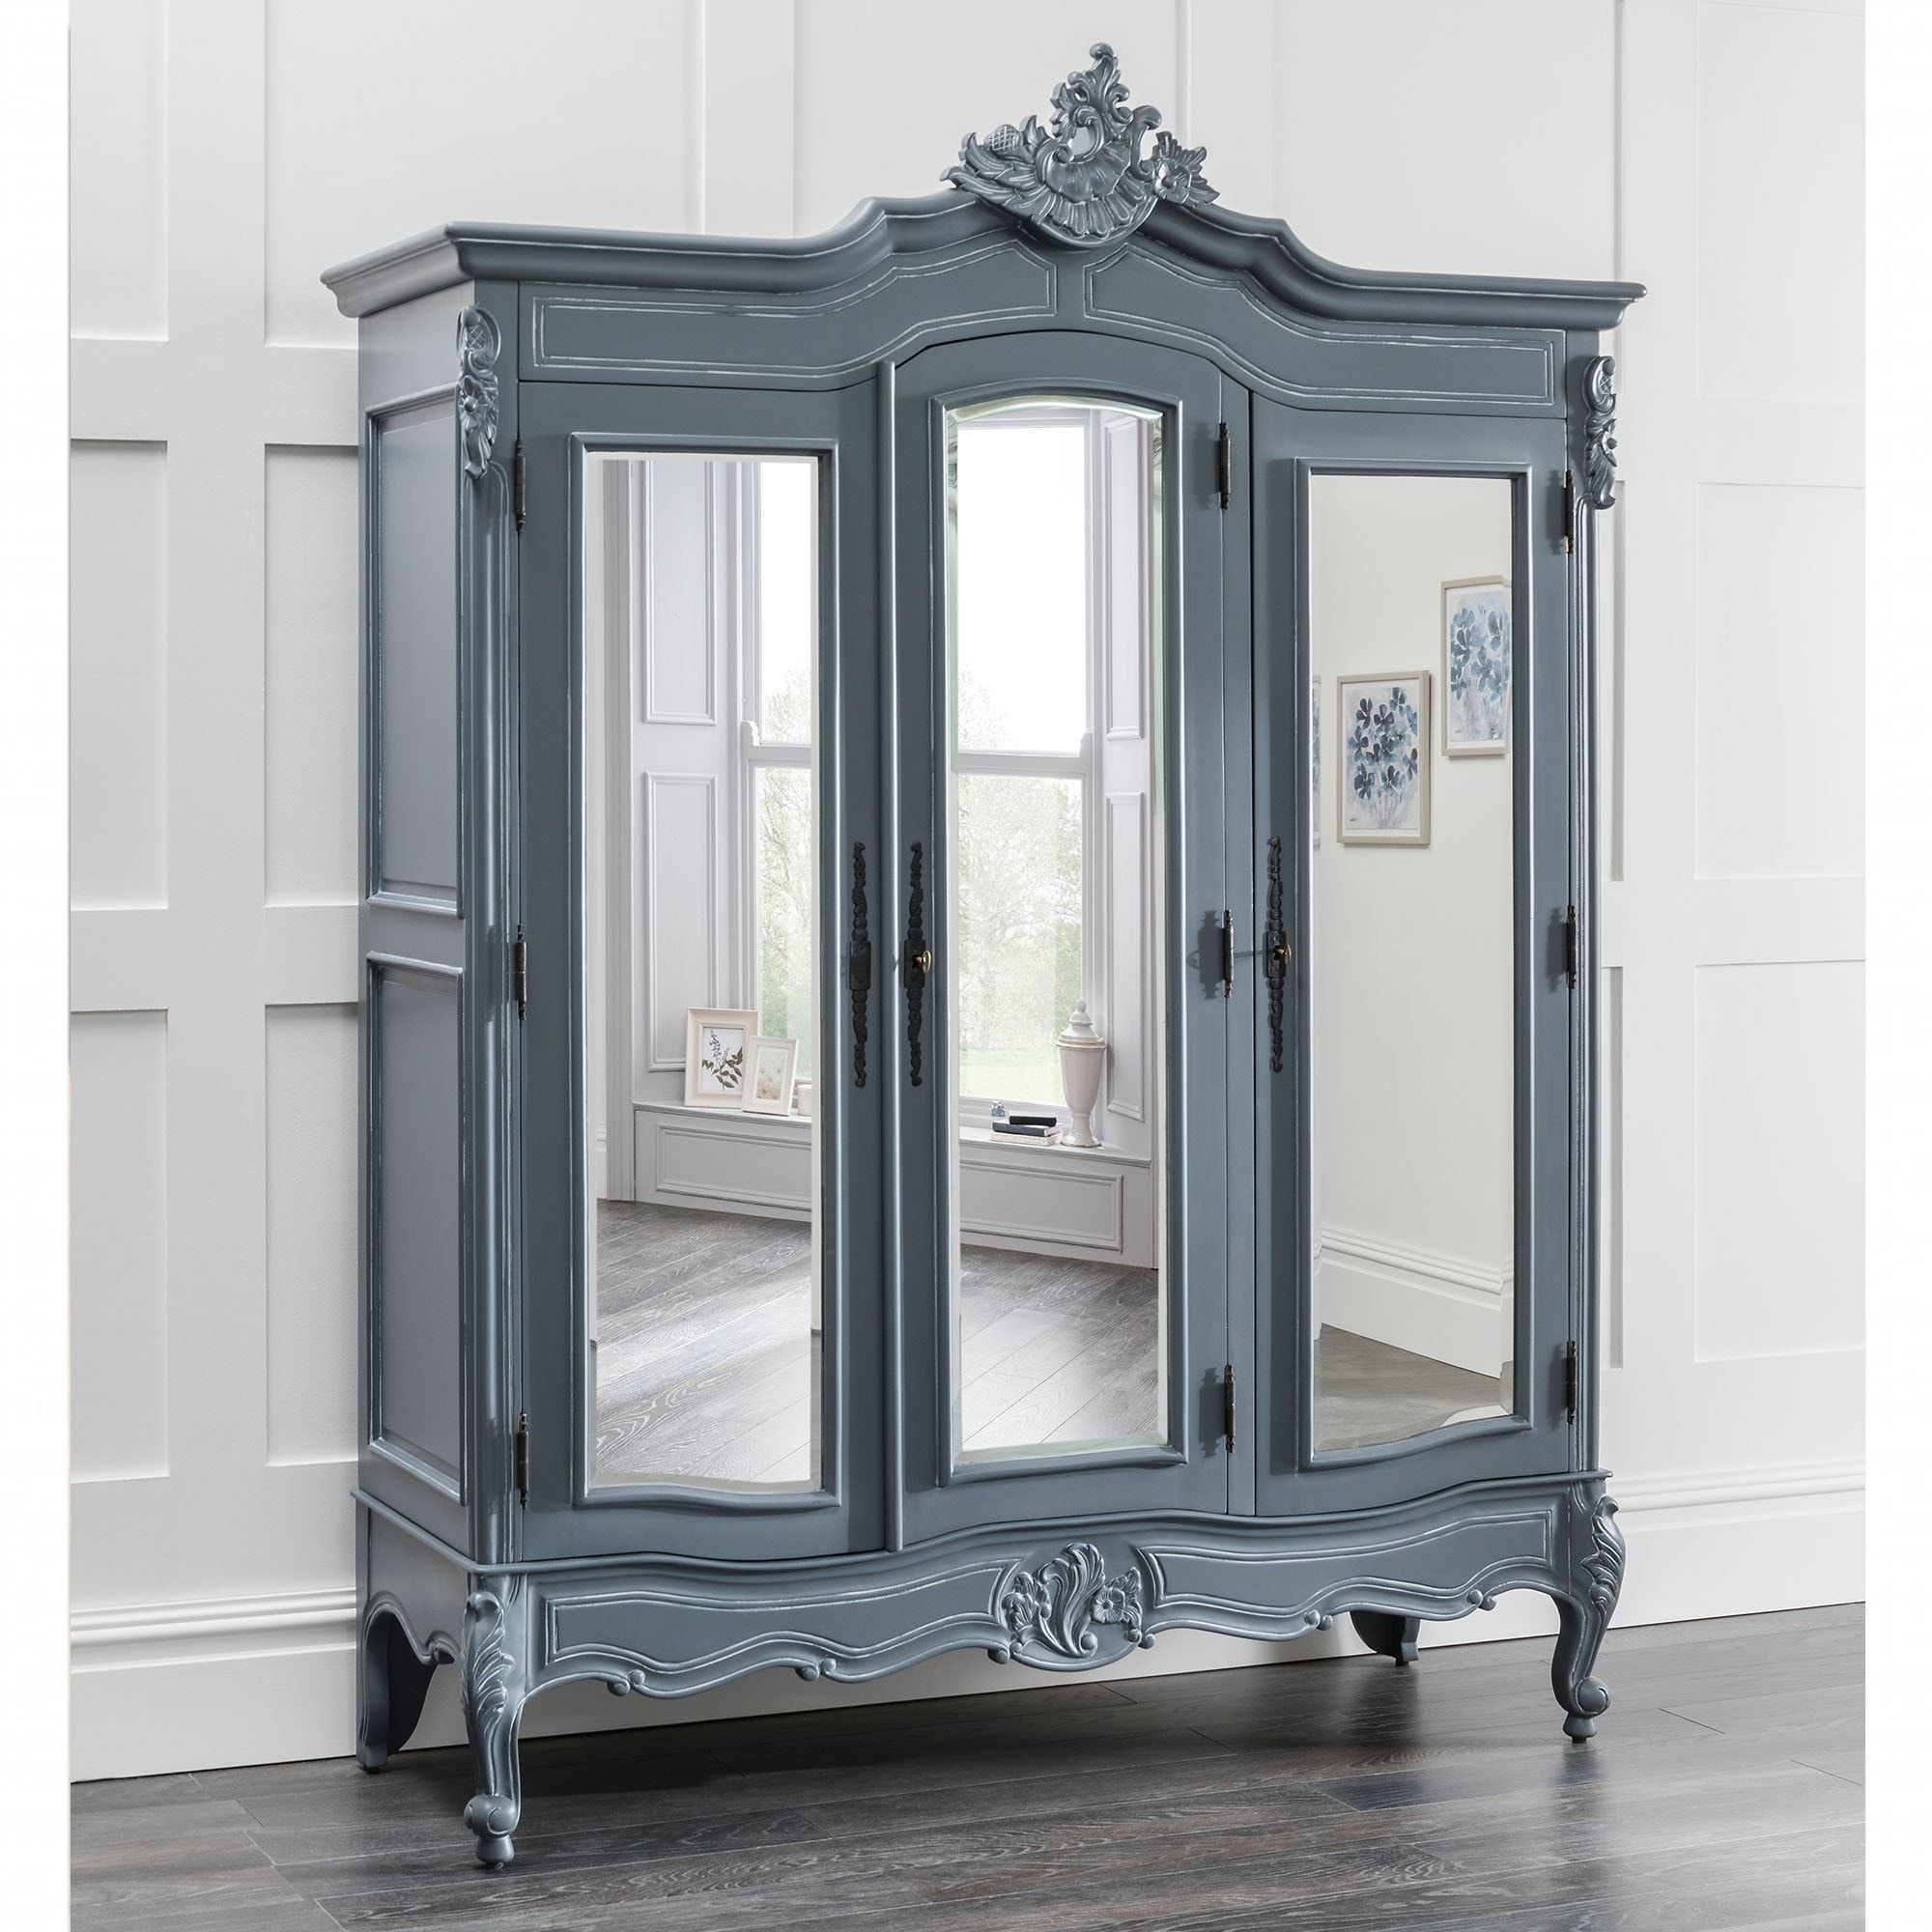 Chloe Antique French Style Triple Wardrobe | French Style Wardrobes Intended For Triple Mirrored Wardrobes (View 5 of 15)